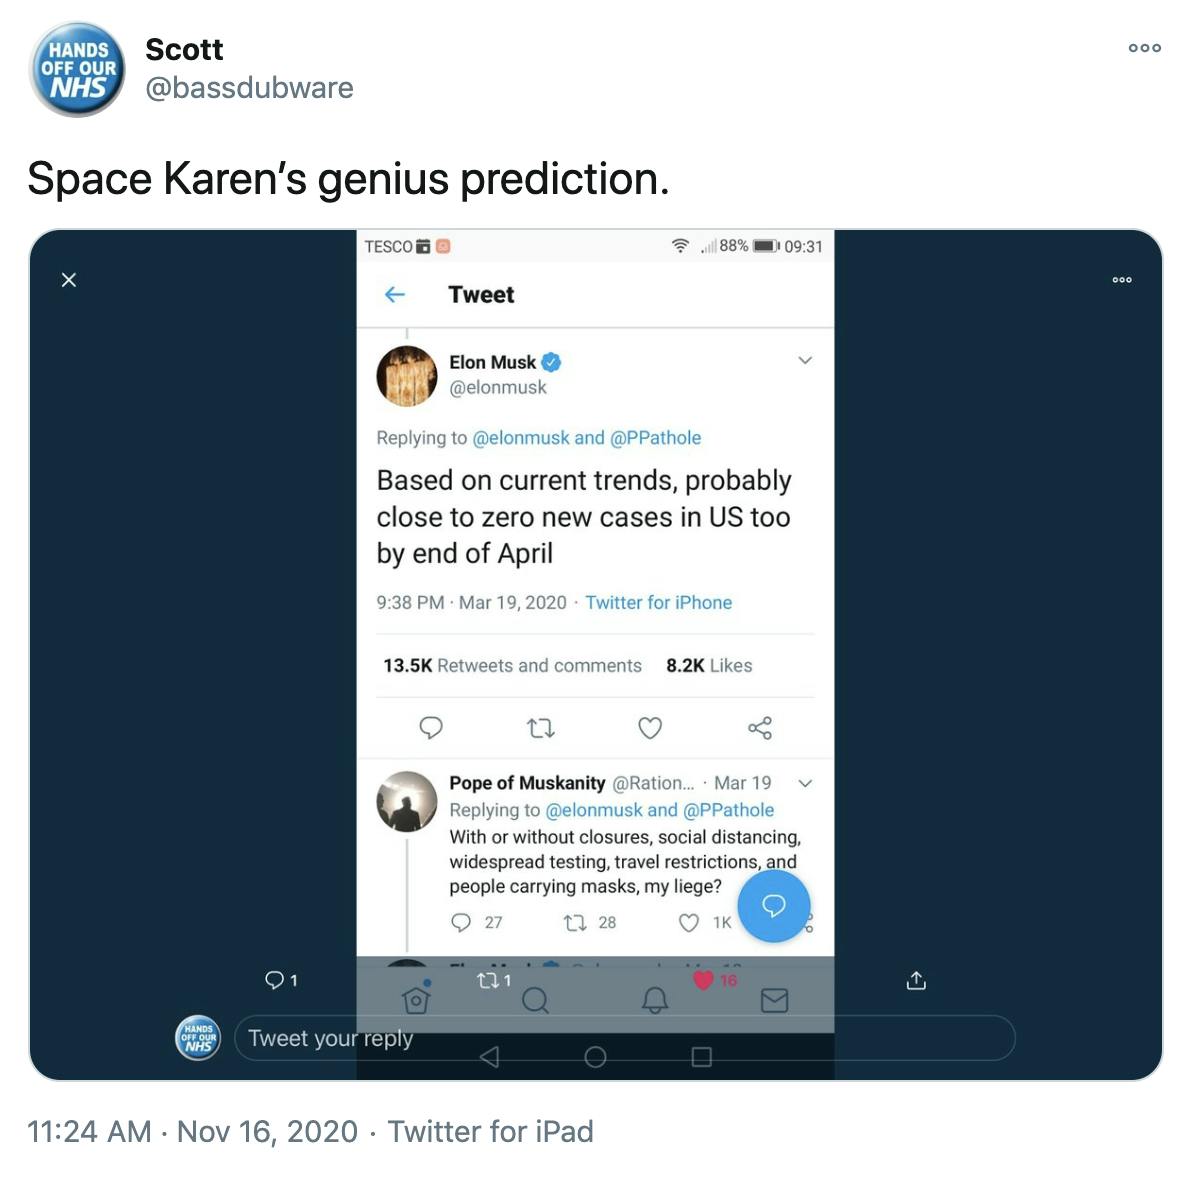 'Space Karen’s genius prediction.' screenshot of Musk's March tweet 'Based on current trends, probably close to zero new cases in US too by end of April' and the reply by Pope of Muskanity 'With or without closure, social distancing, widespread testing, travel restrictions, and carrying masks my liege?'